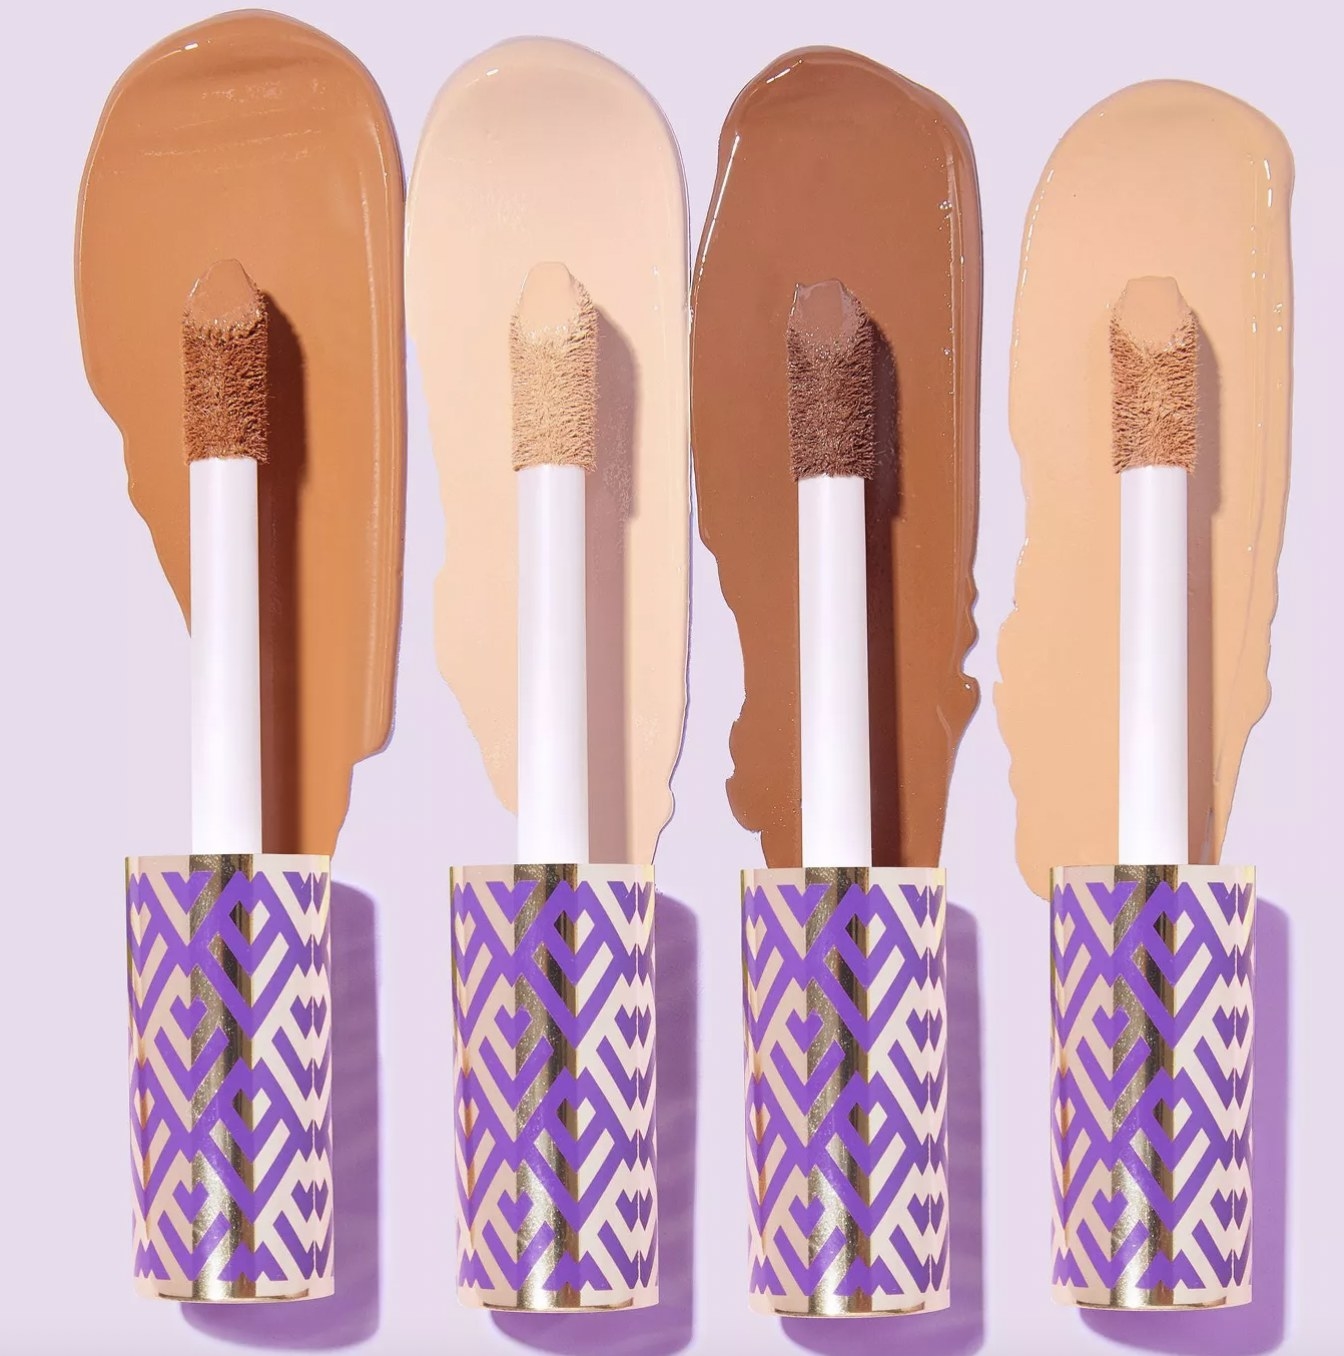 A set of four concealer wands with different shades